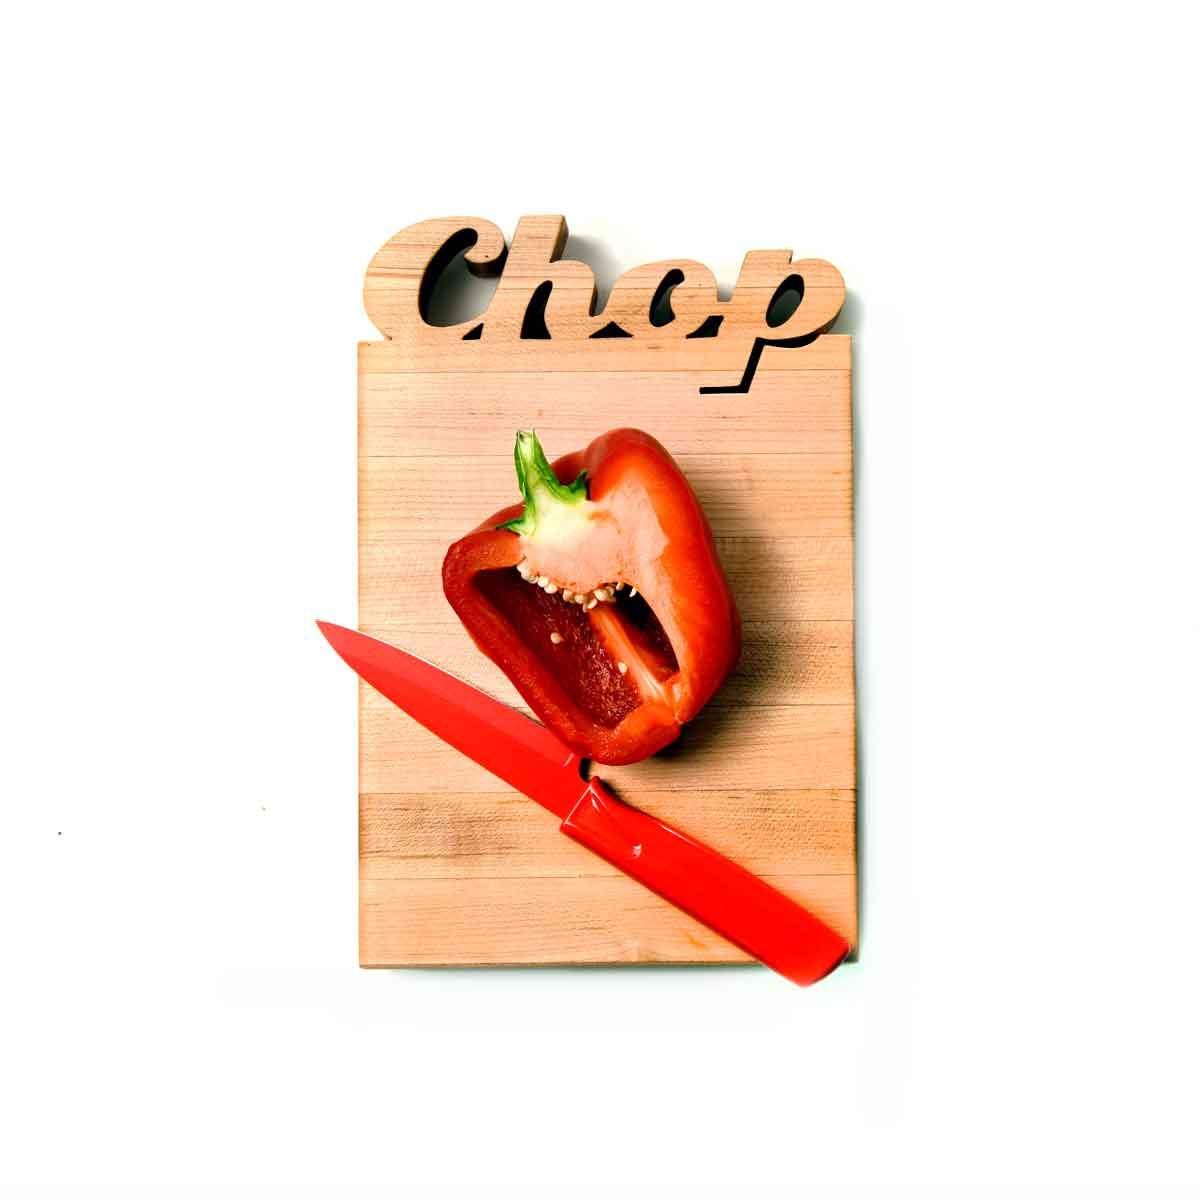 Mini Cutting Boards - Words with Boards, LLC